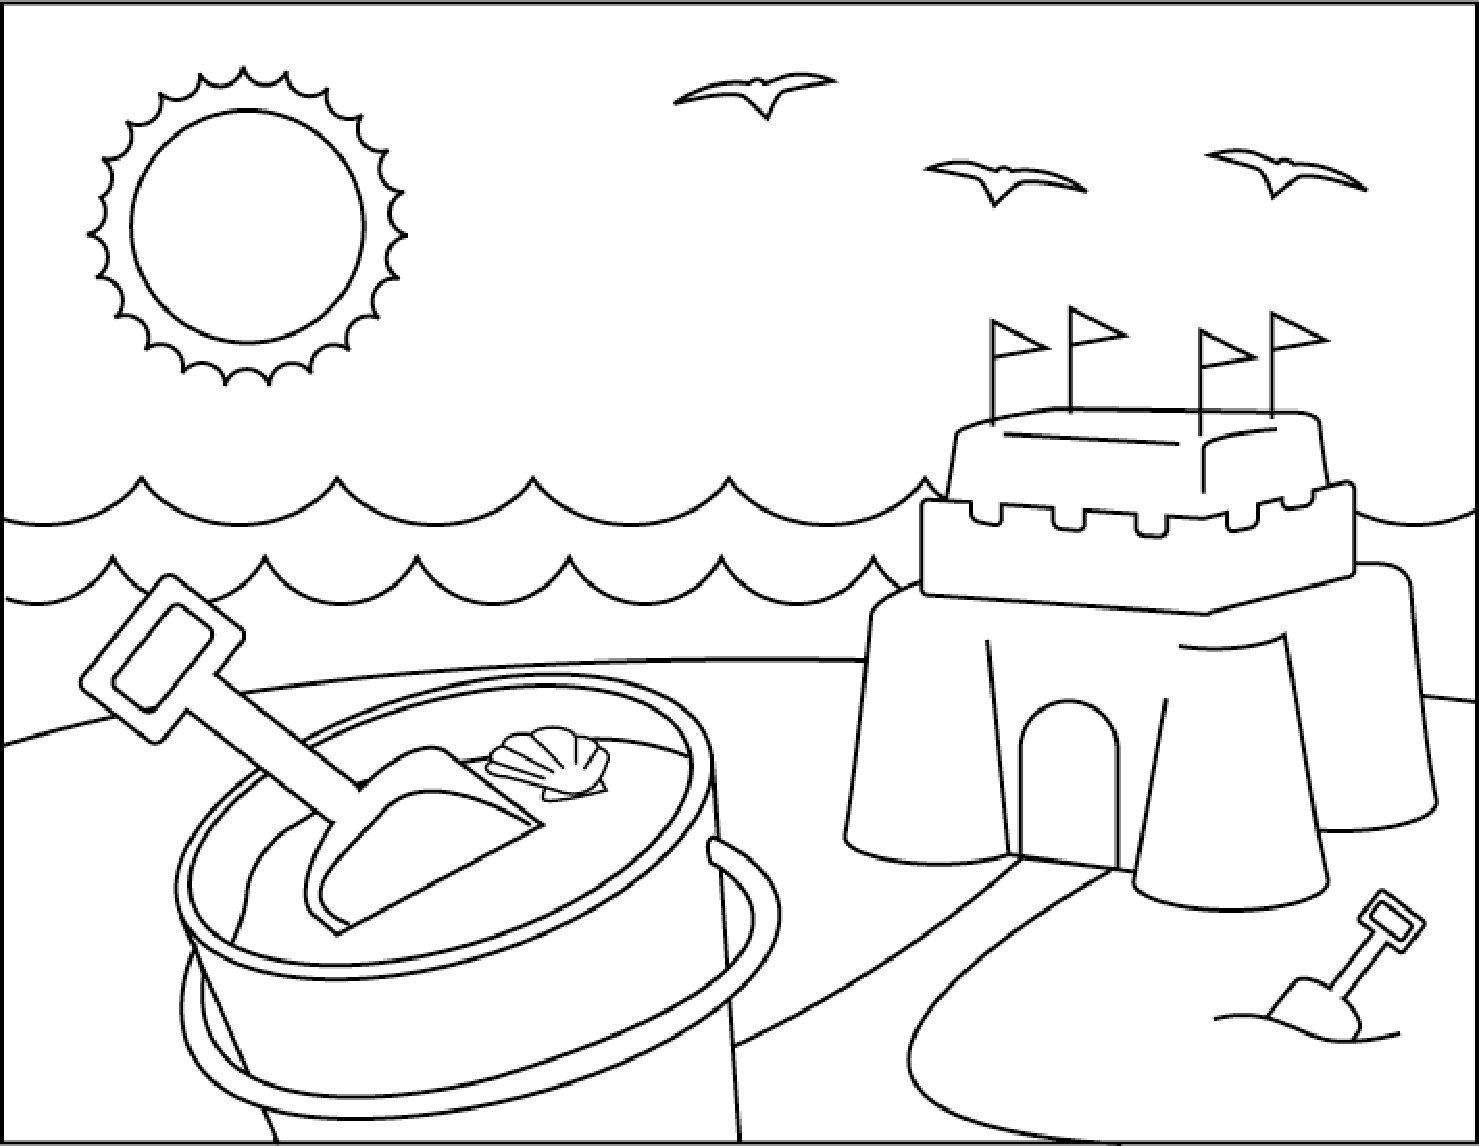 Beach Coloring Pages For Kids
 Sand Castle Beach Summer coloring picture for kids